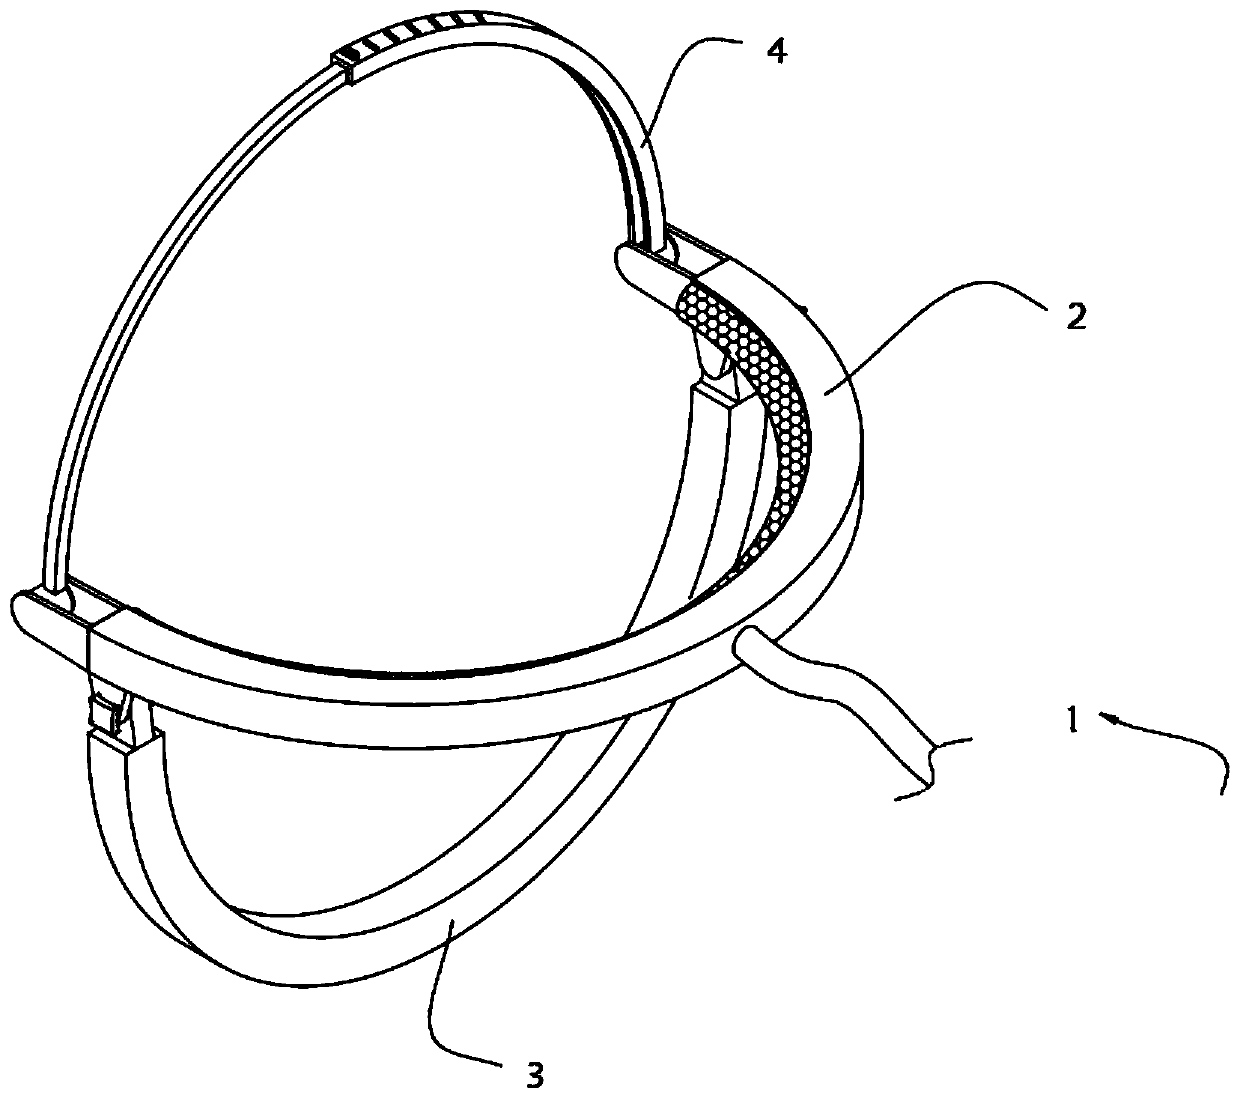 Craniocerebral surgery fixation device and method of use thereof